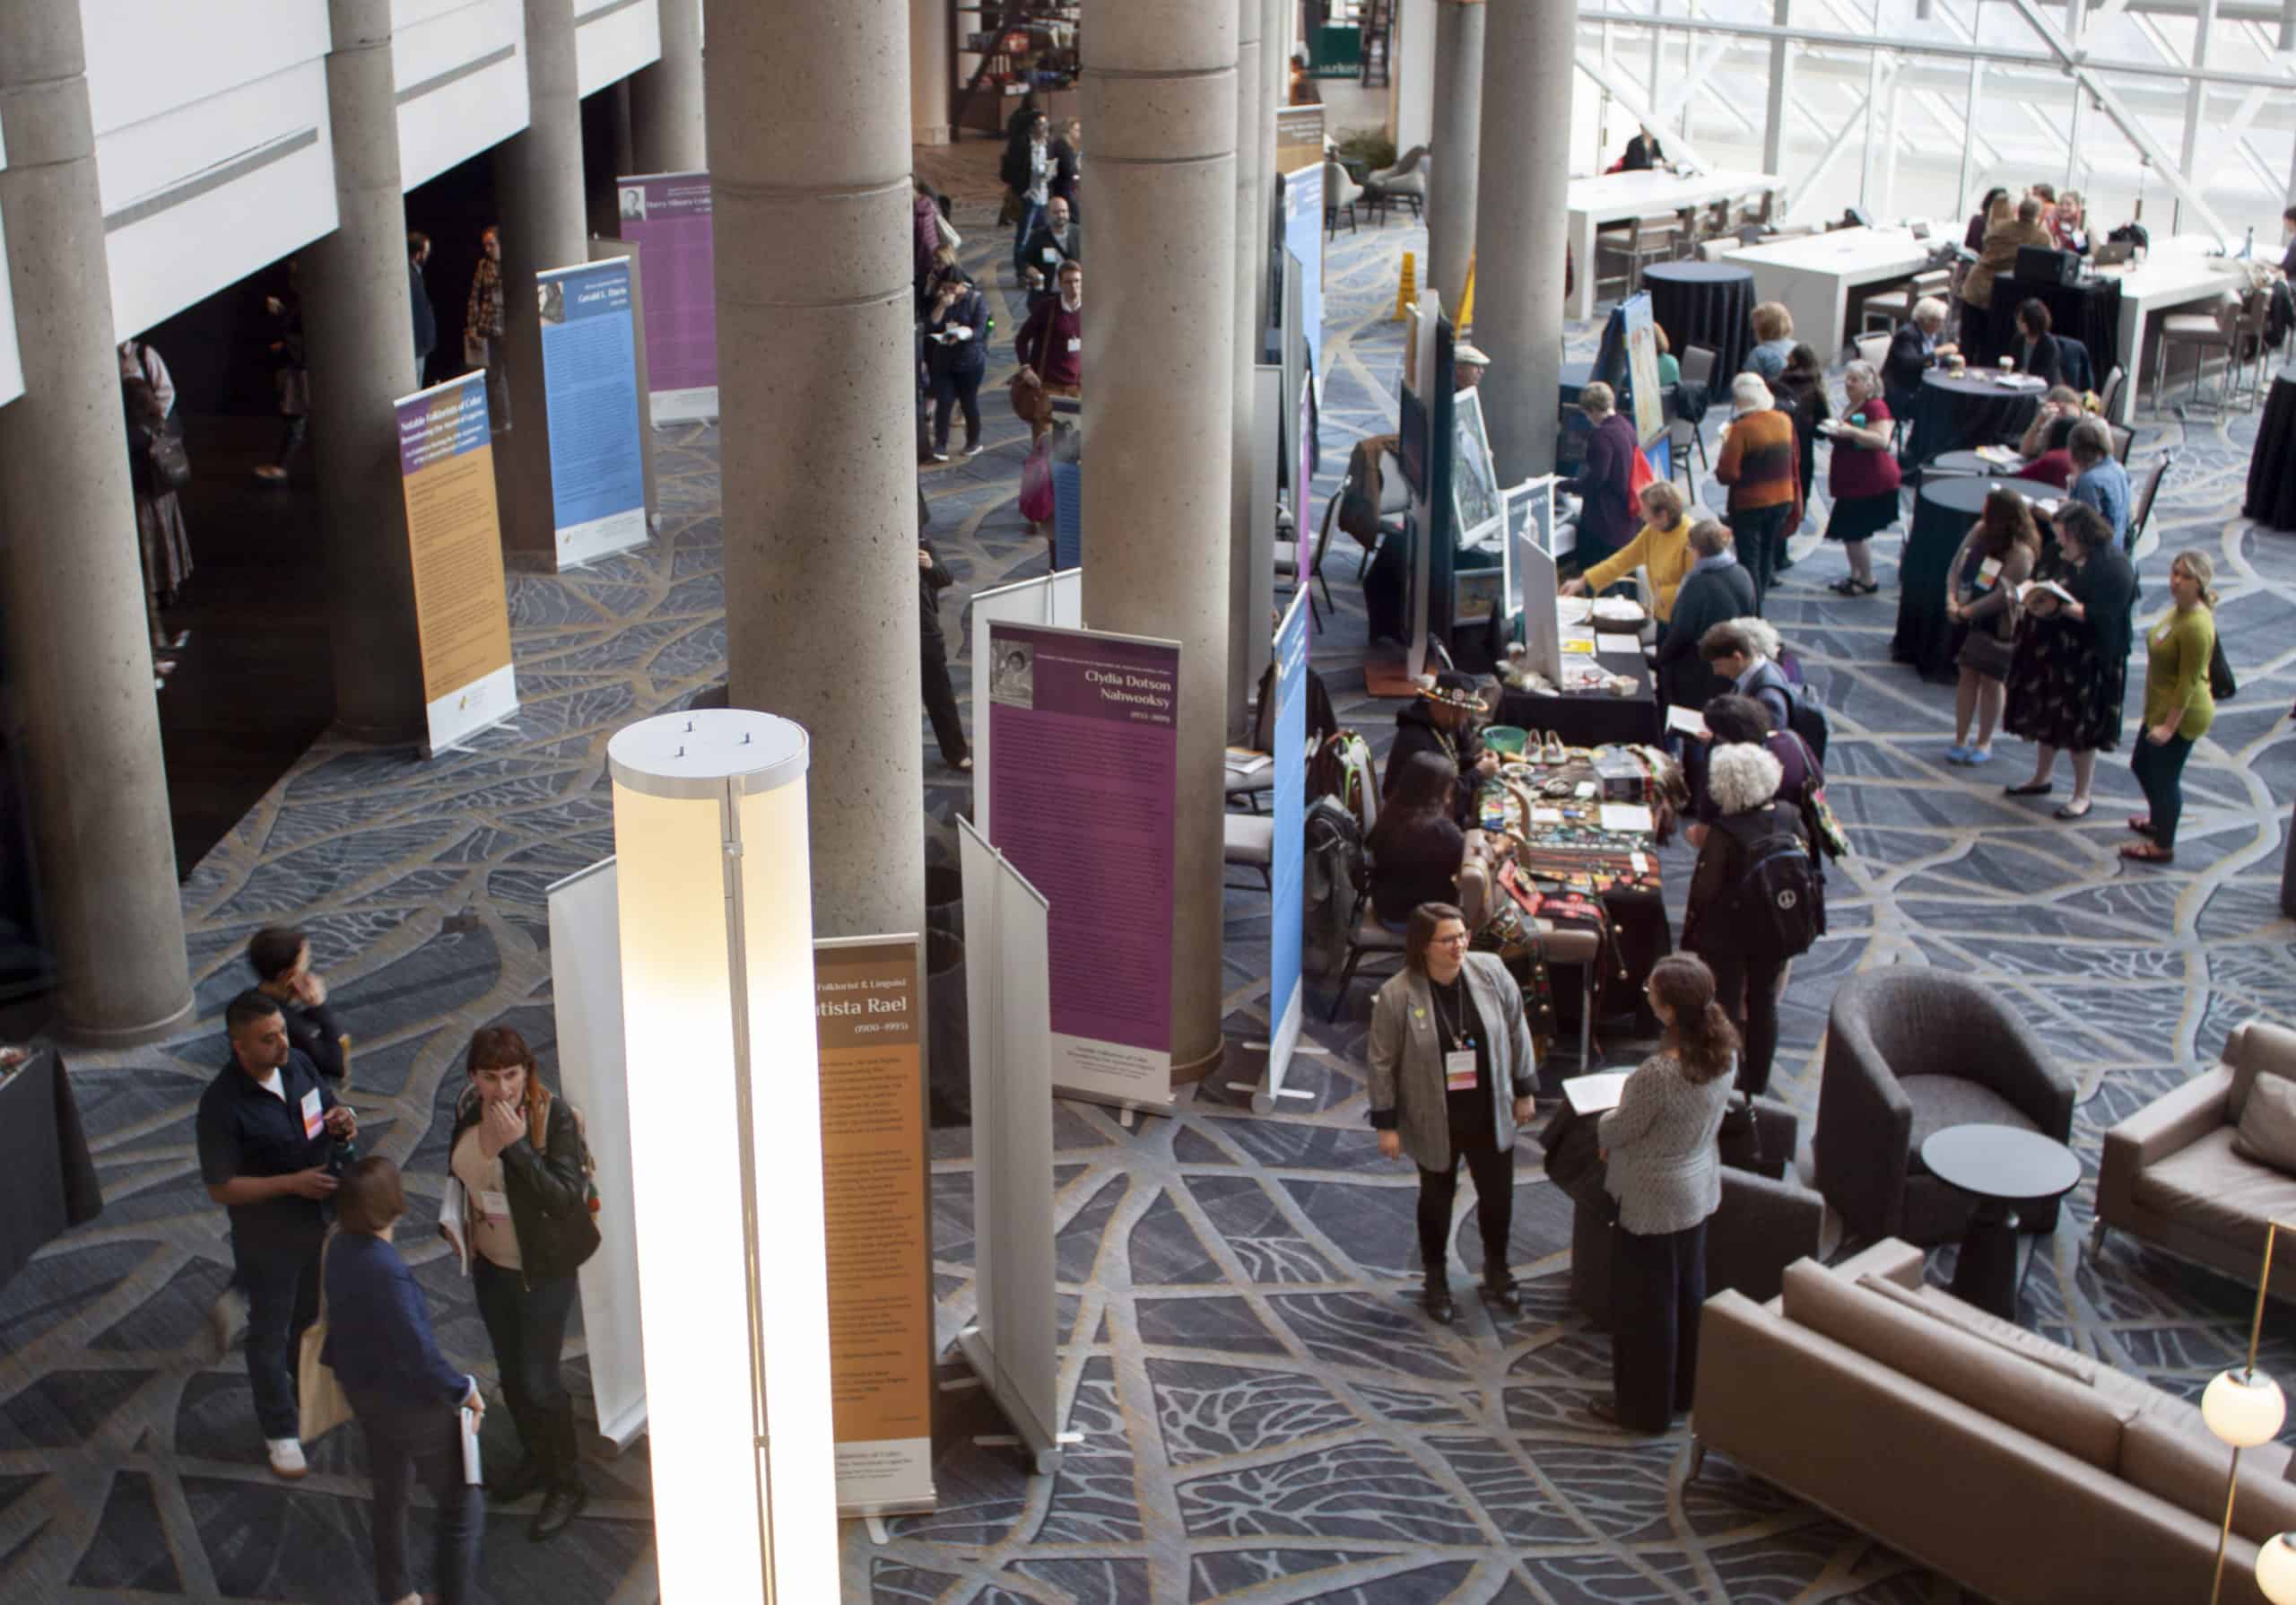 View from above of many people gathered in a hotel lobby around posters and exhibit tables